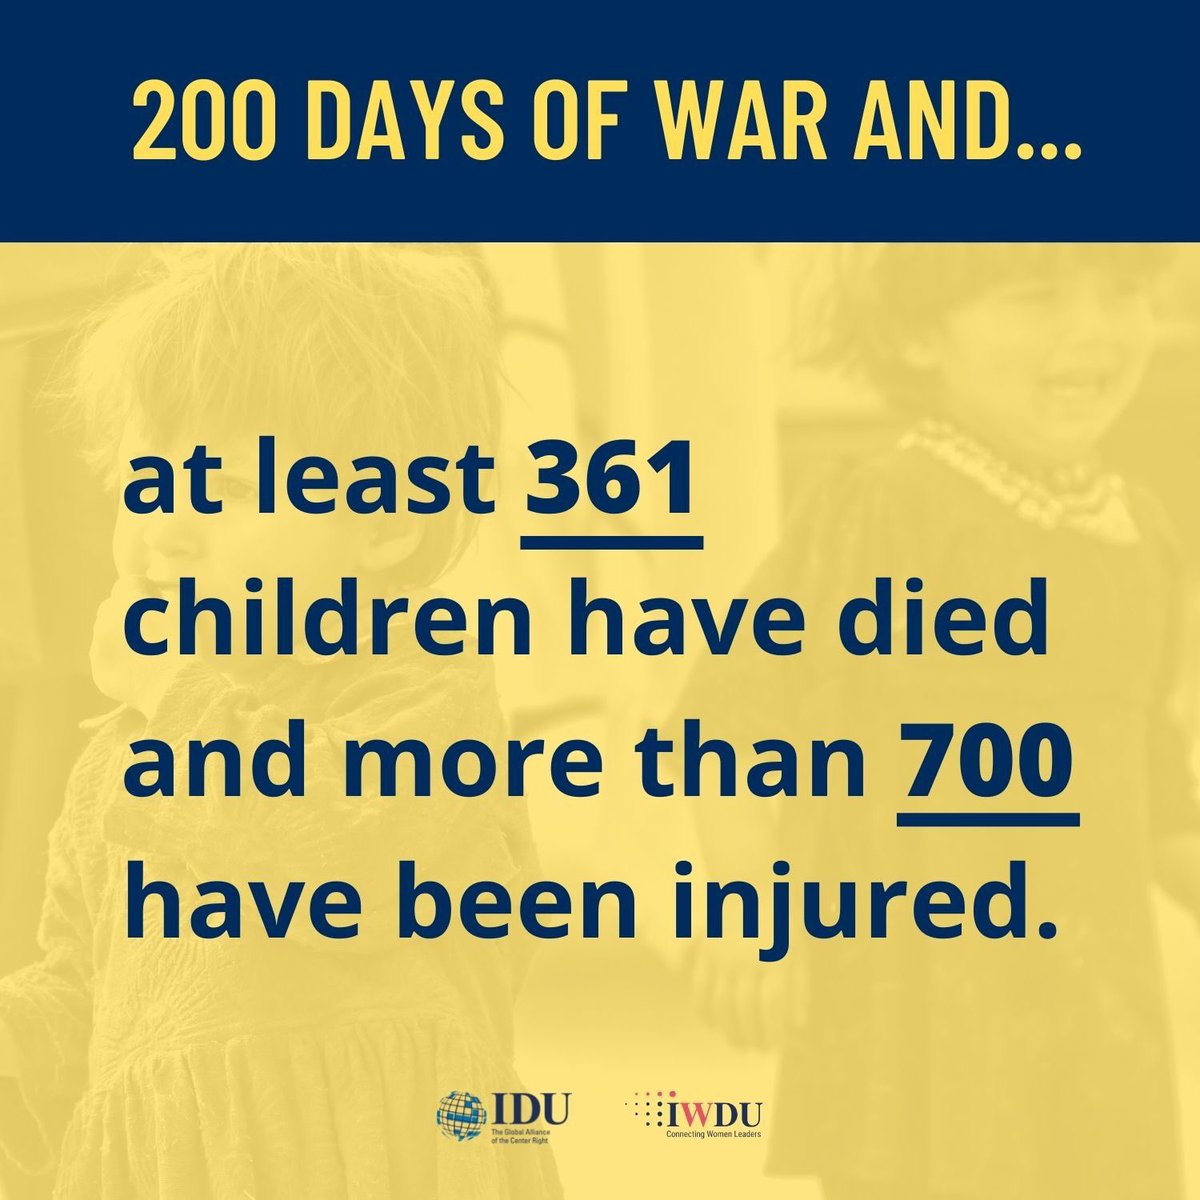 #200daysofwar in #Ukraine and at least 361 children have died, more than 700 injured. This war has to stop. Join us for a timely discussion tomorrow with @MPMaria_Ionova, @Sofiabrambilla, @RobertaMetsola and more! Register here: mailchi.mp/idu/iwdu-15040…